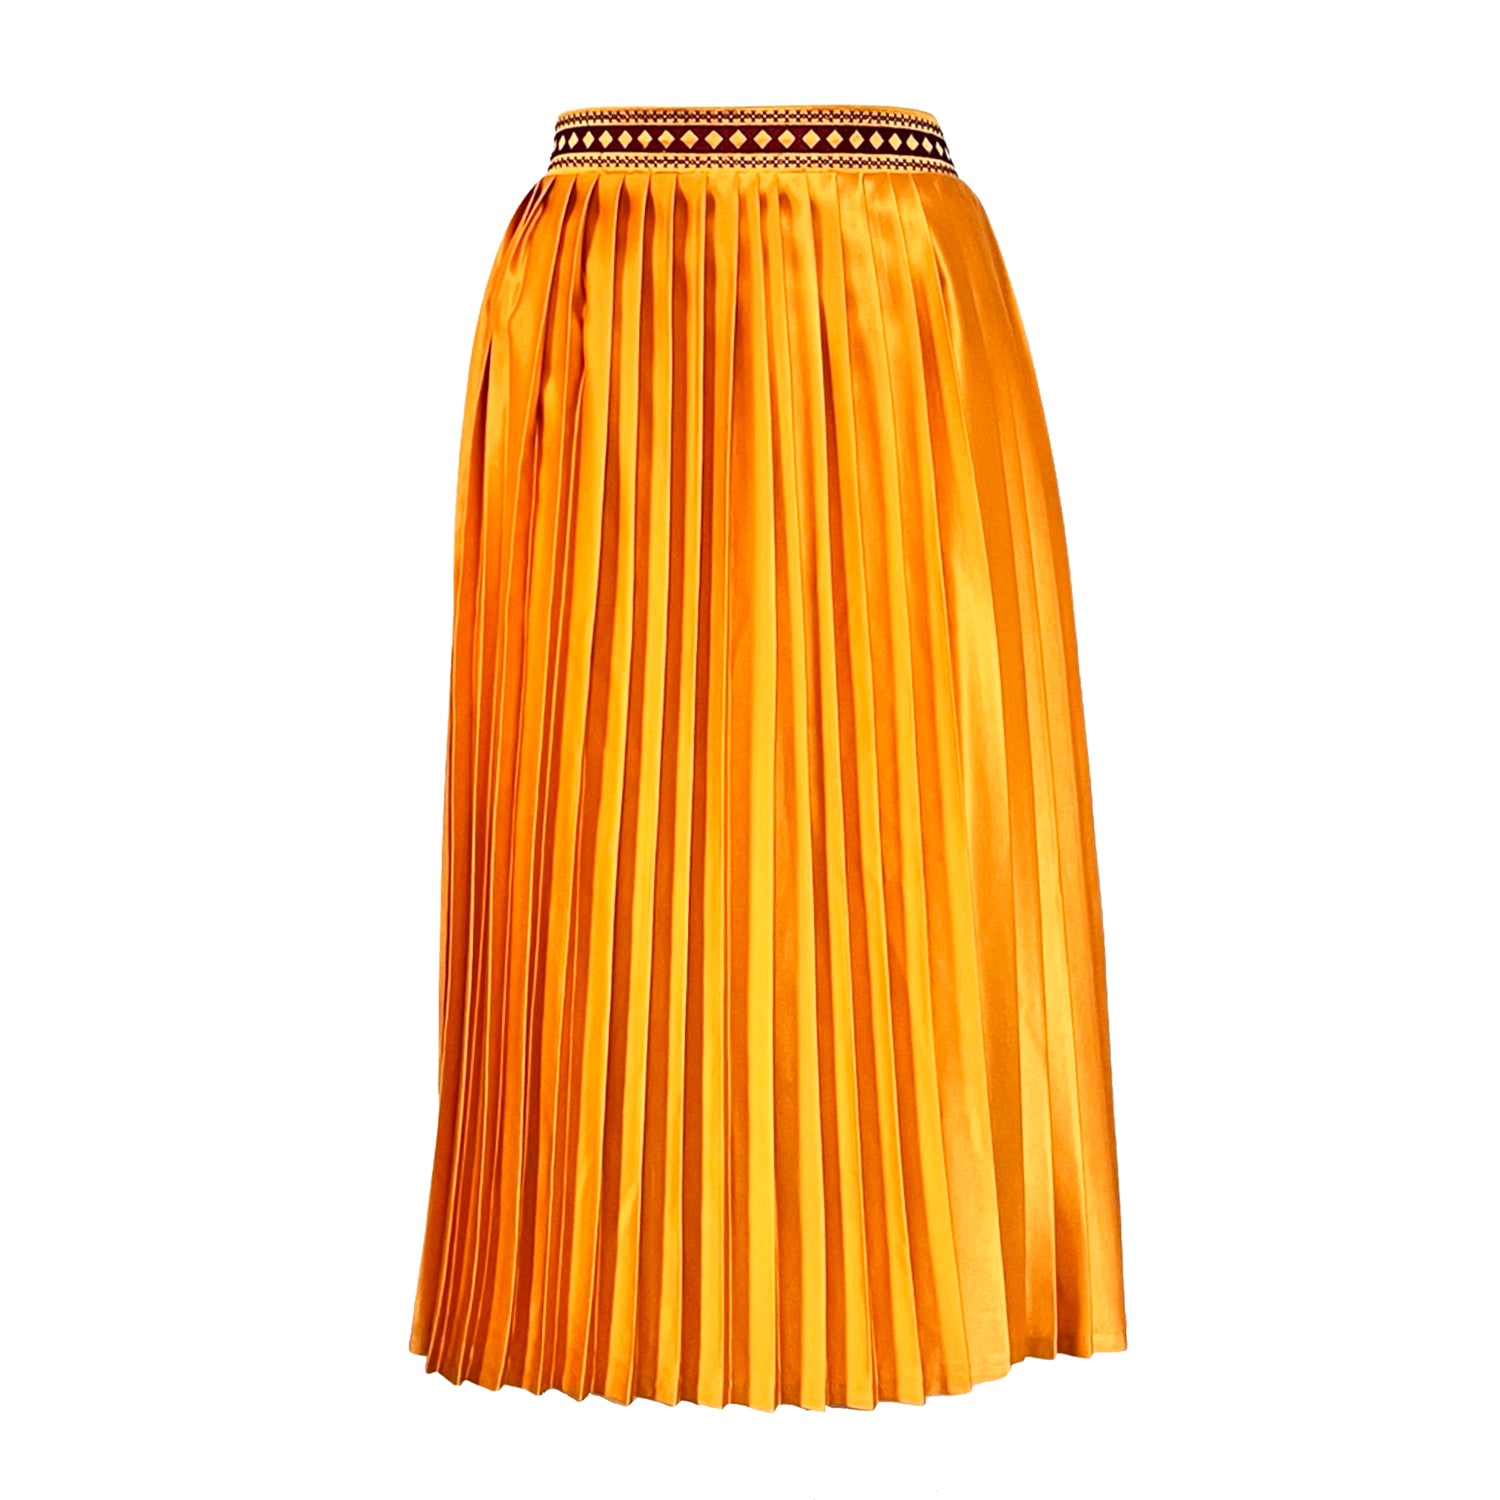 Embroidered Pleated Midi Skirt in Mustard Yellow